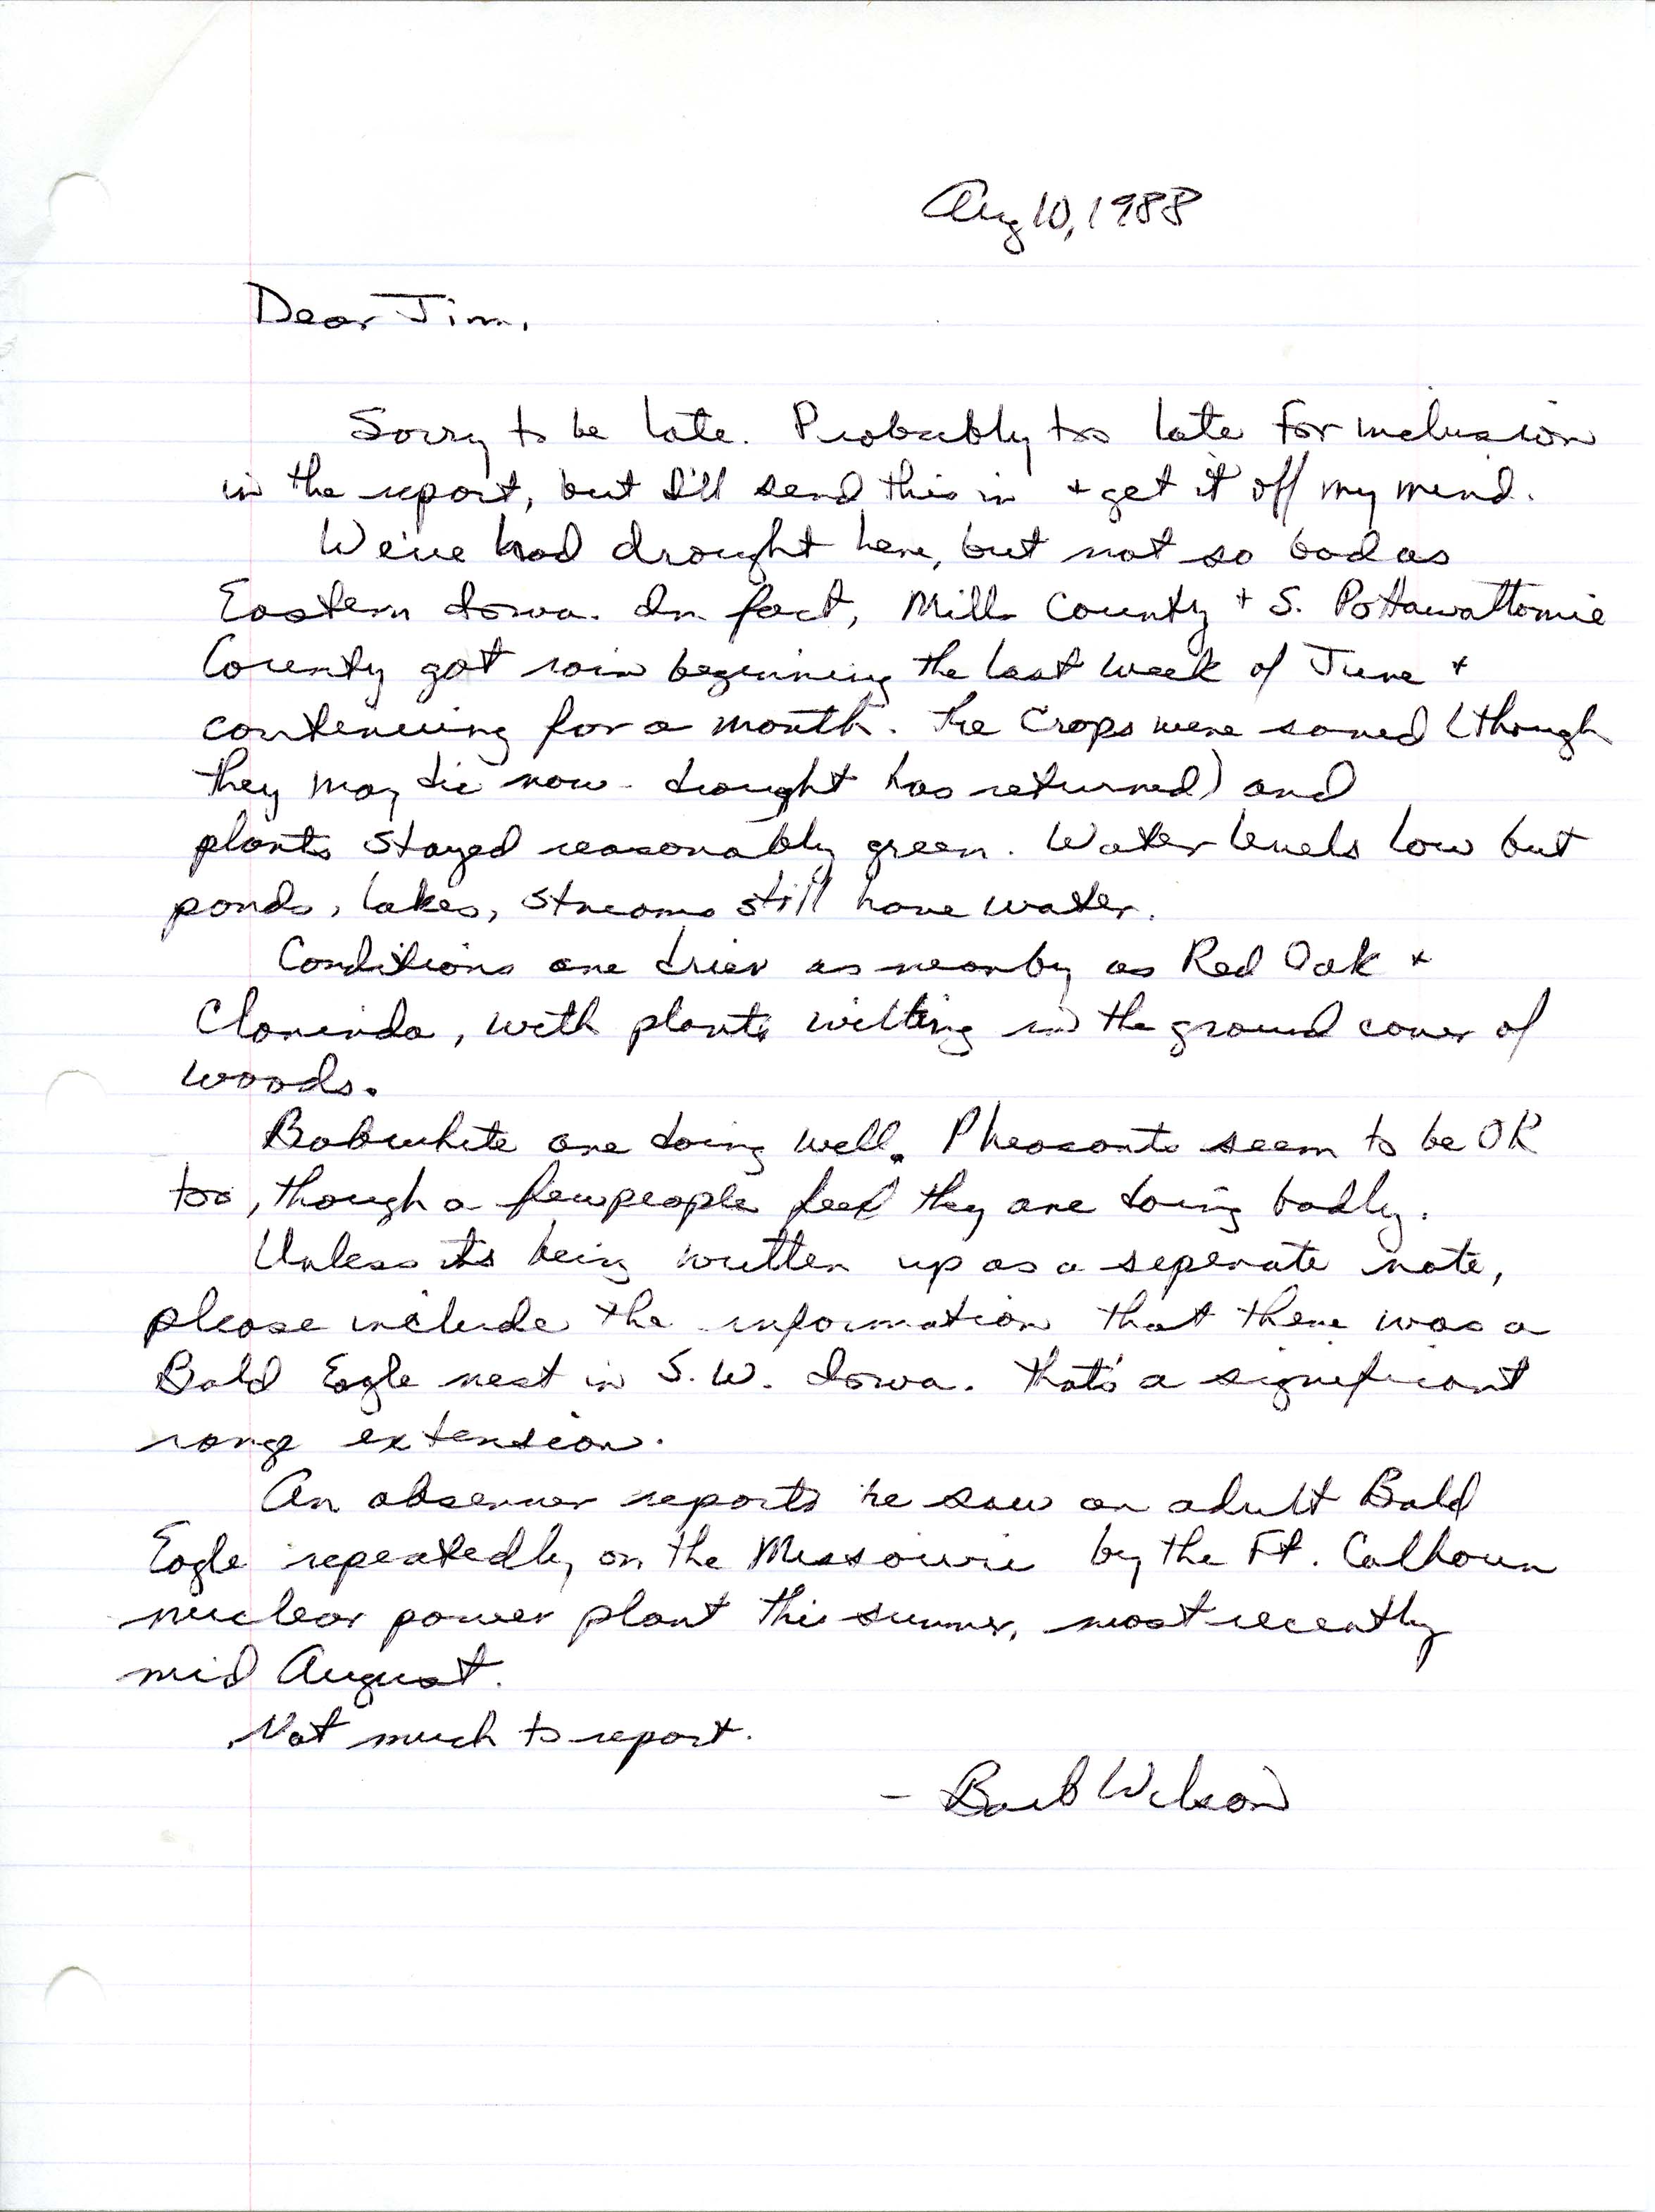 Barbara L. Wilson letter to James J. Dinsmore regarding the drought conditions and a Bald Eagle sighting, August 10, 1988